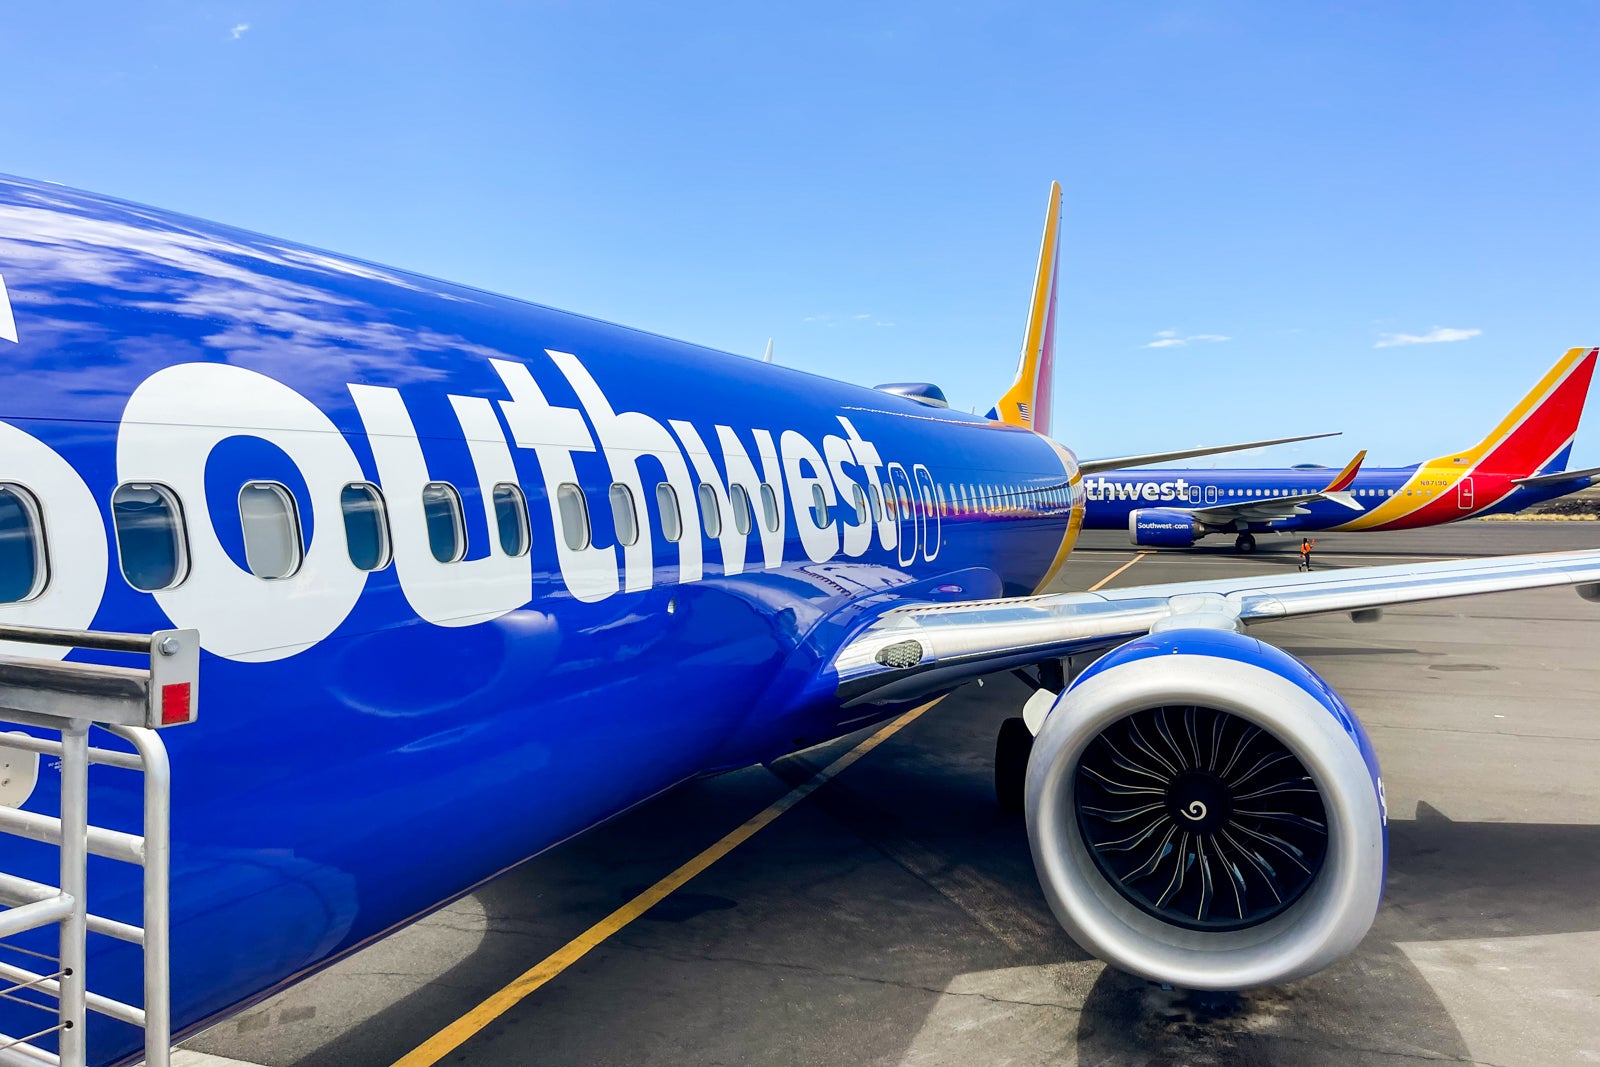 How to redeem your points with the Southwest Rapid Rewards program